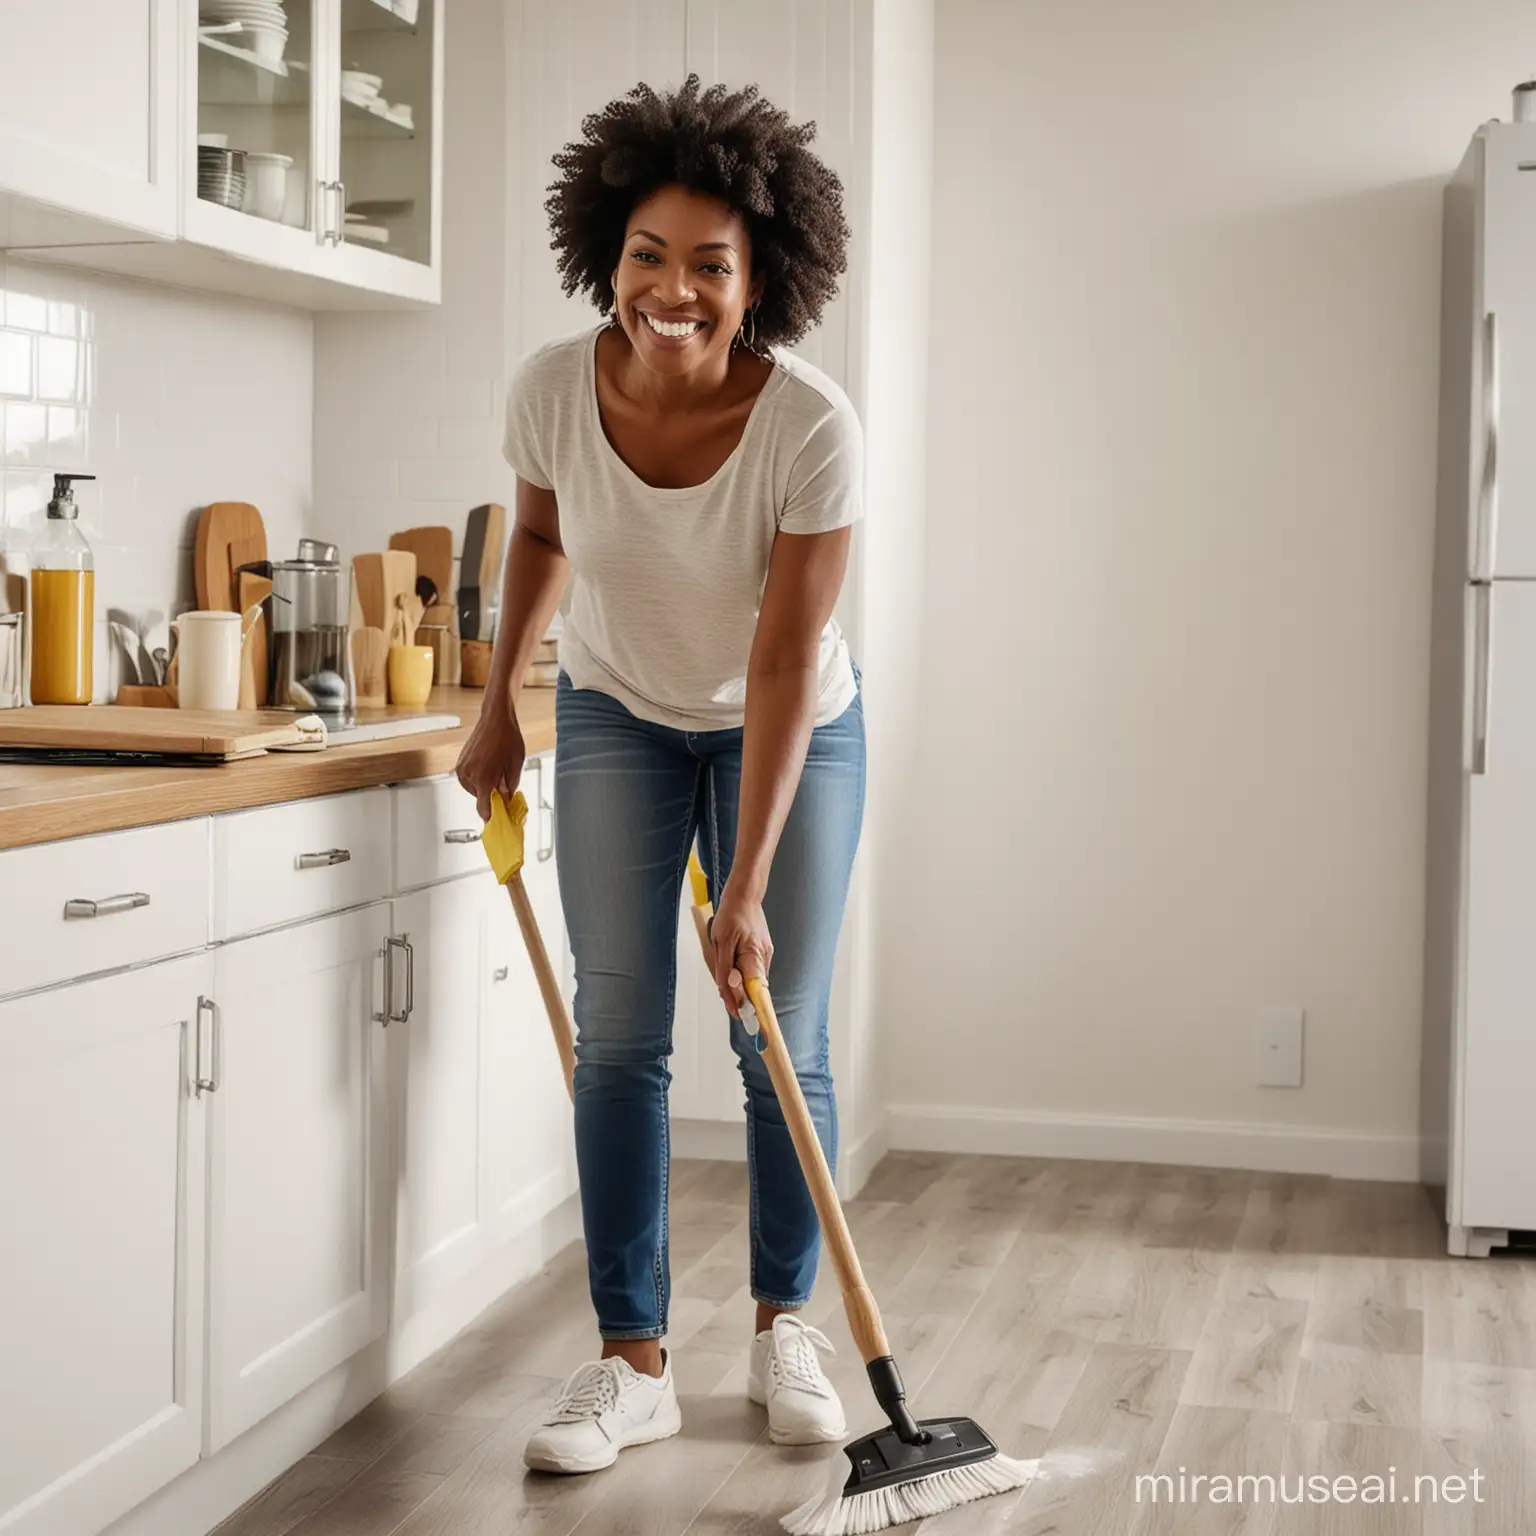 Middle aged black woman with a sweeping brushing who is cleaning her kitchen.